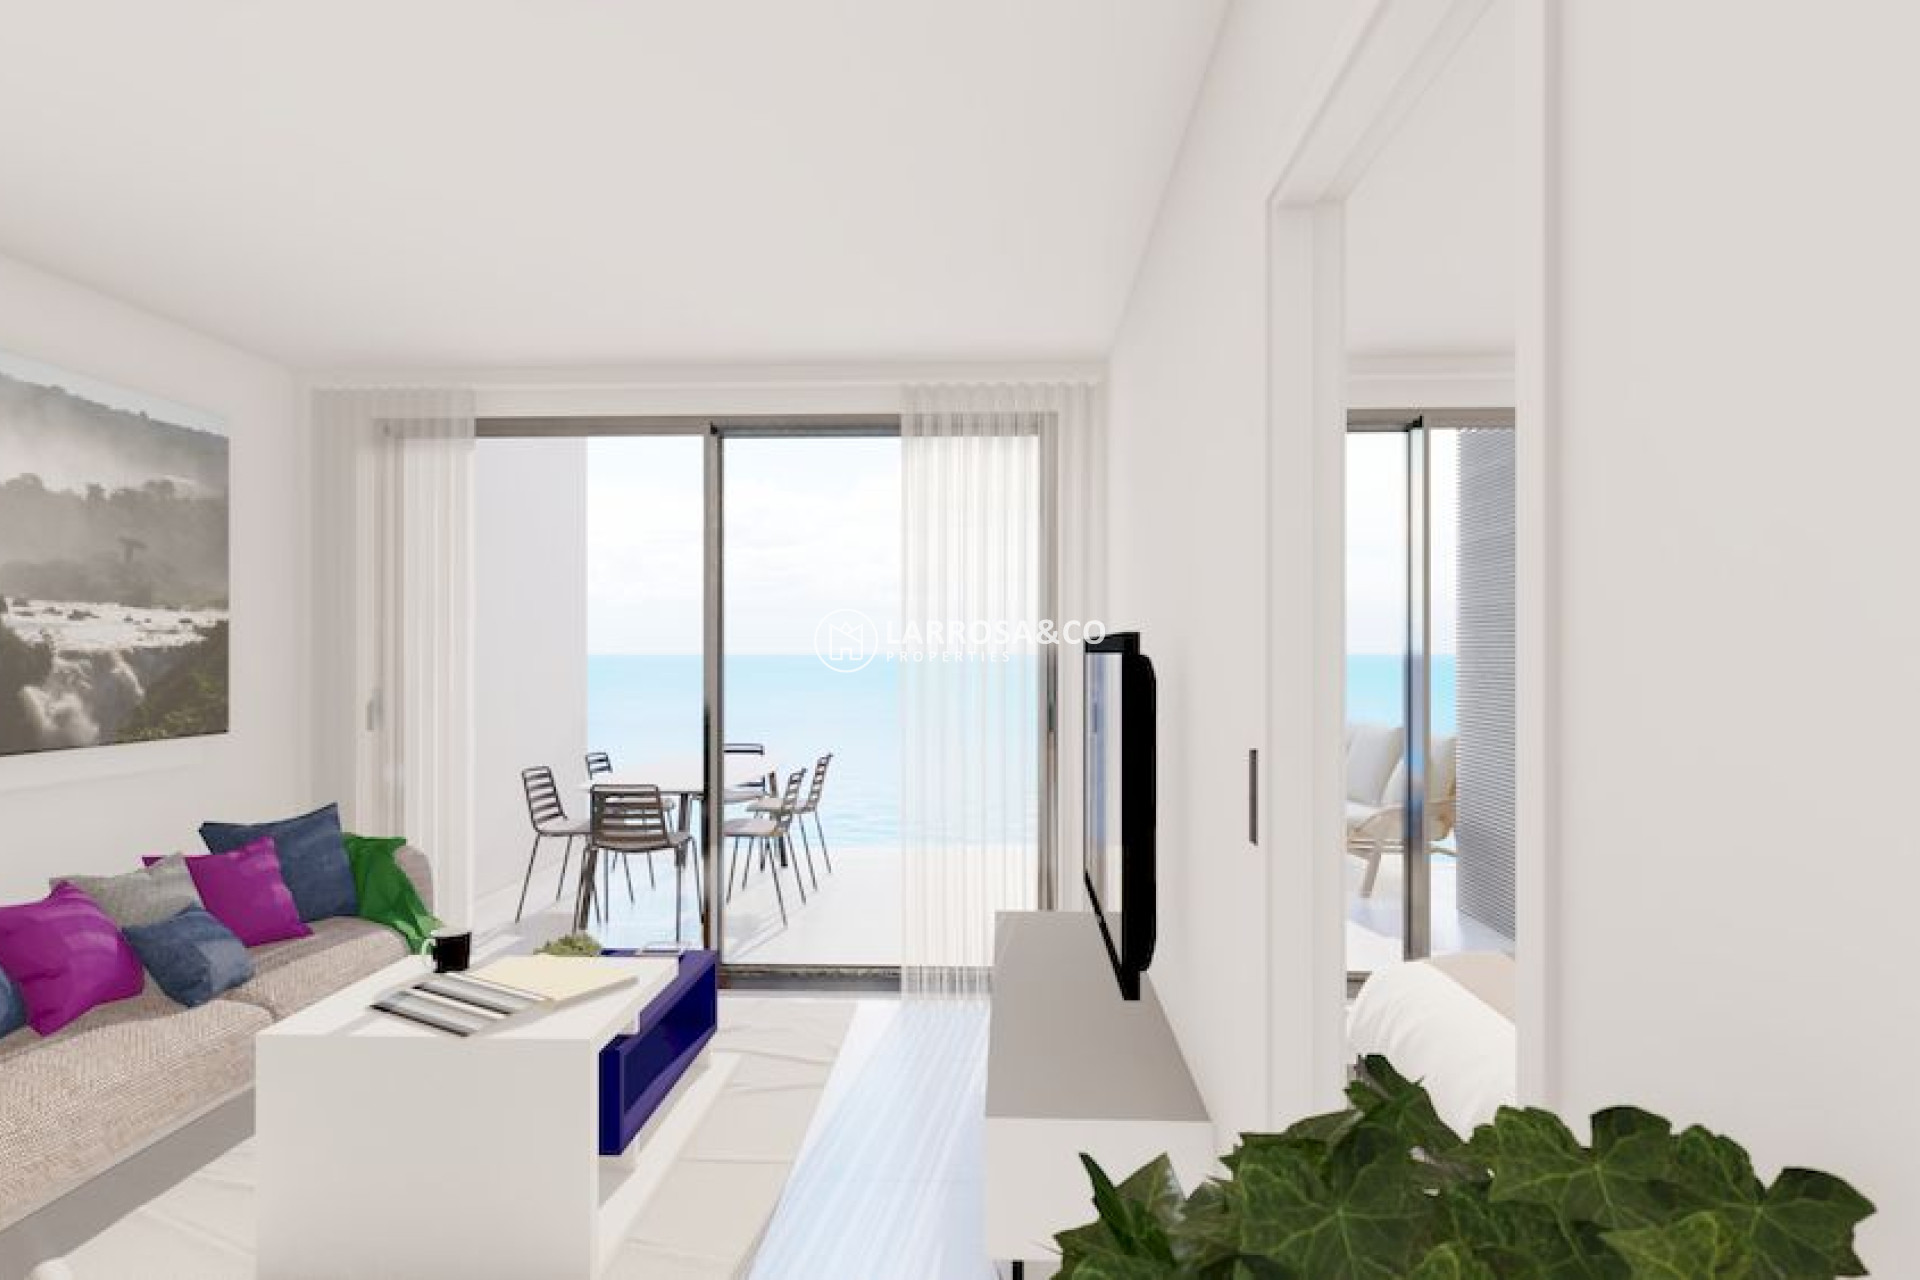 New build - Penthouse  - Torrevieja - Los Locos Beach